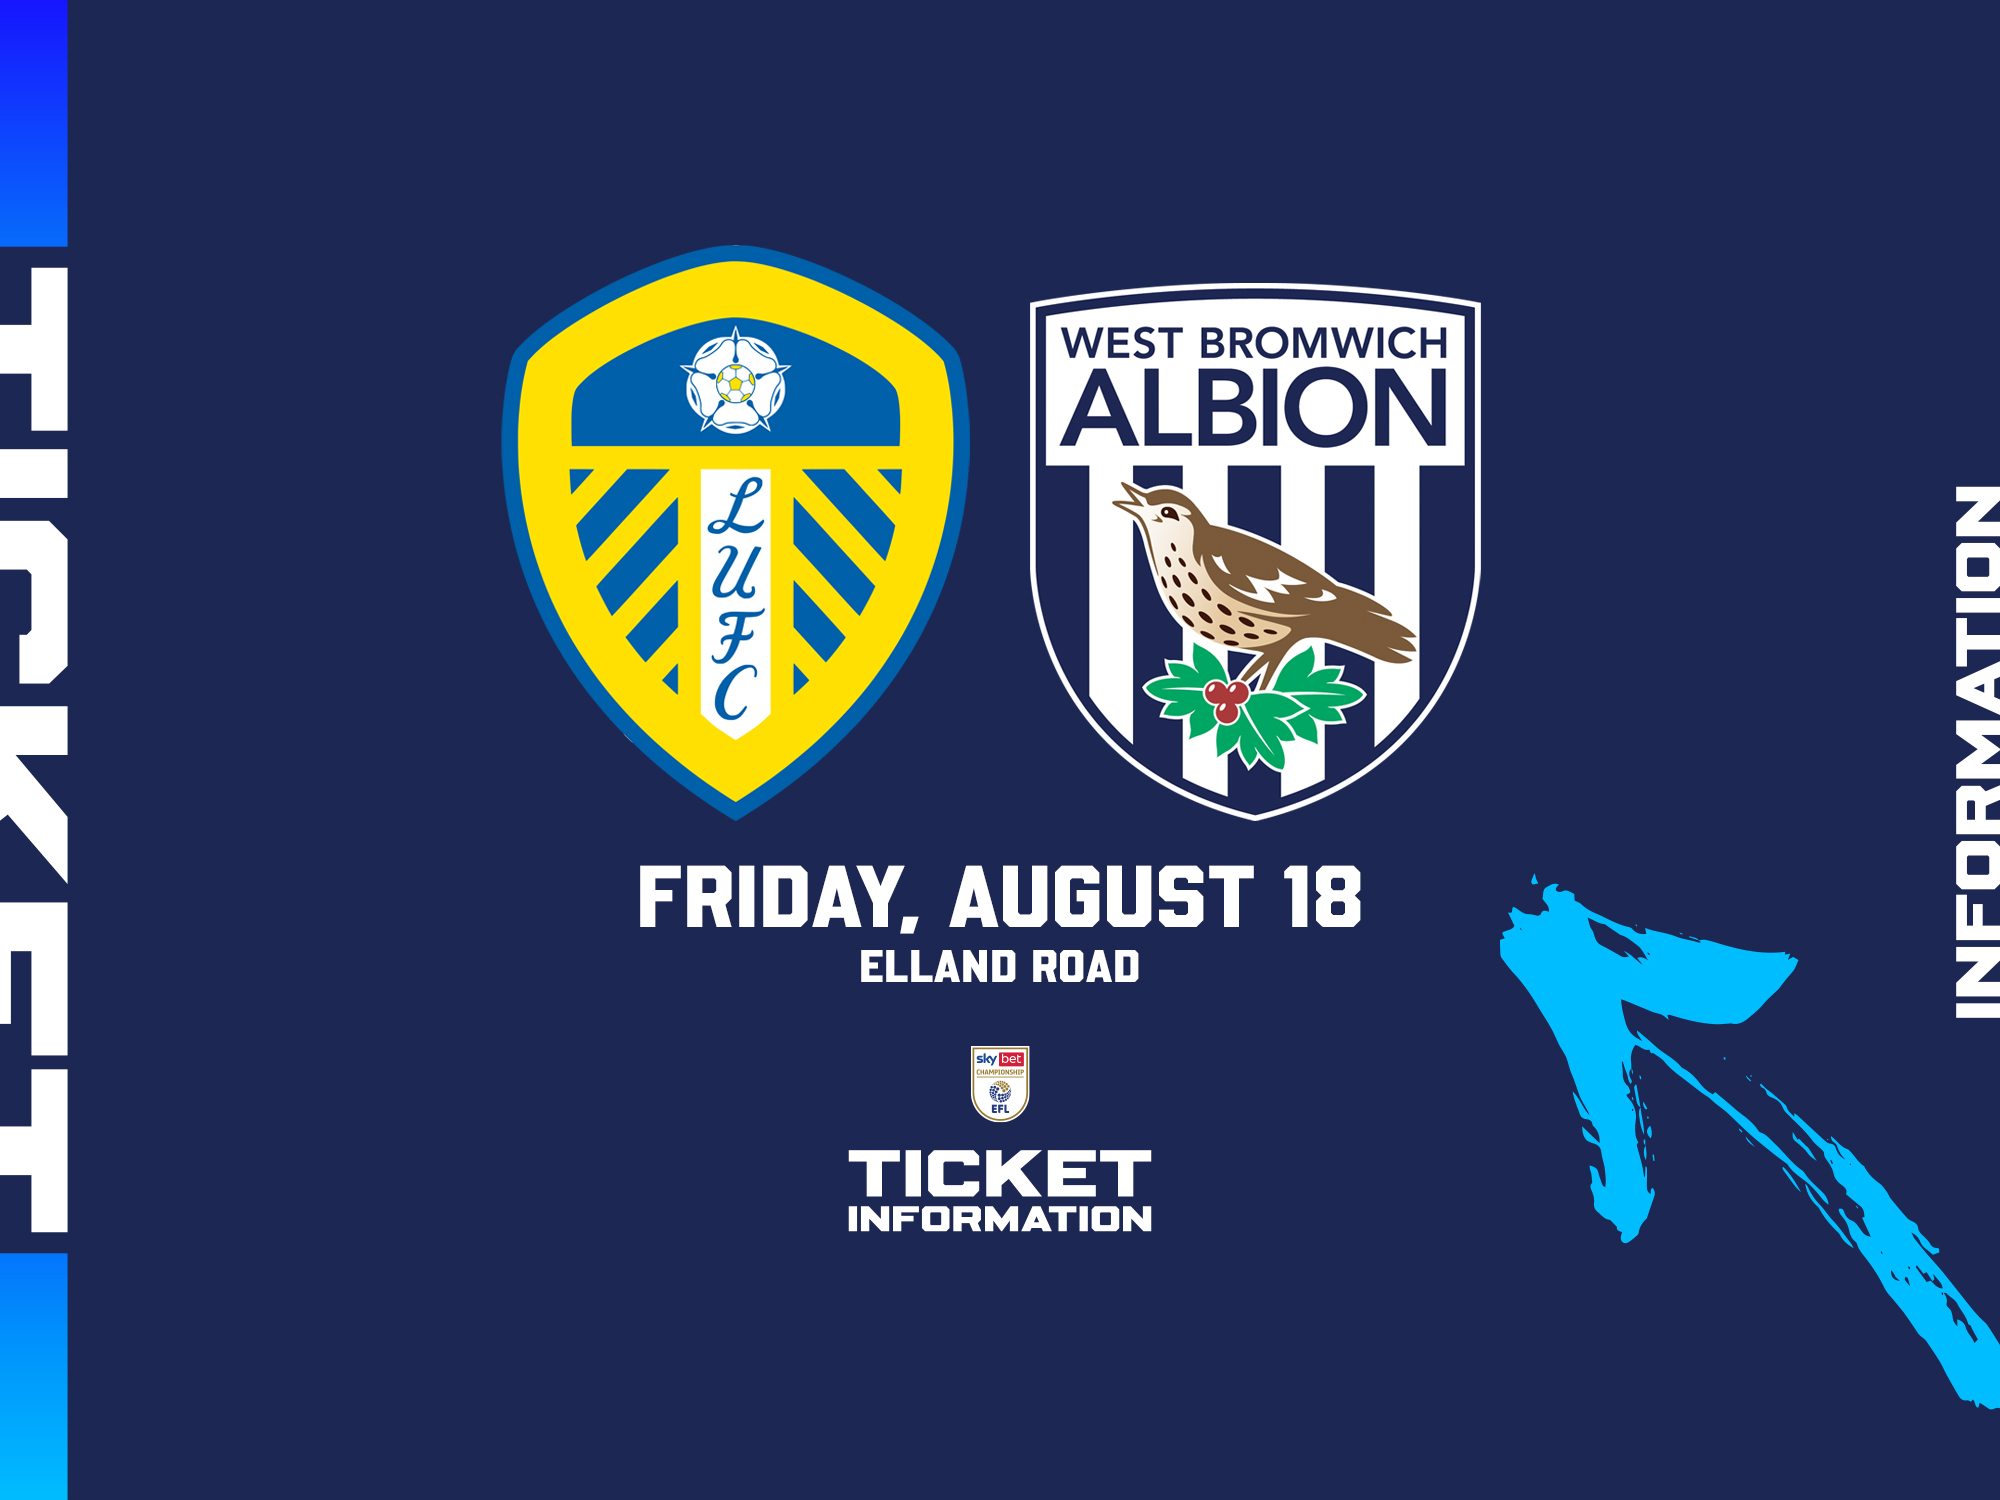 A ticket graphic displaying information for Albion's game at Leeds